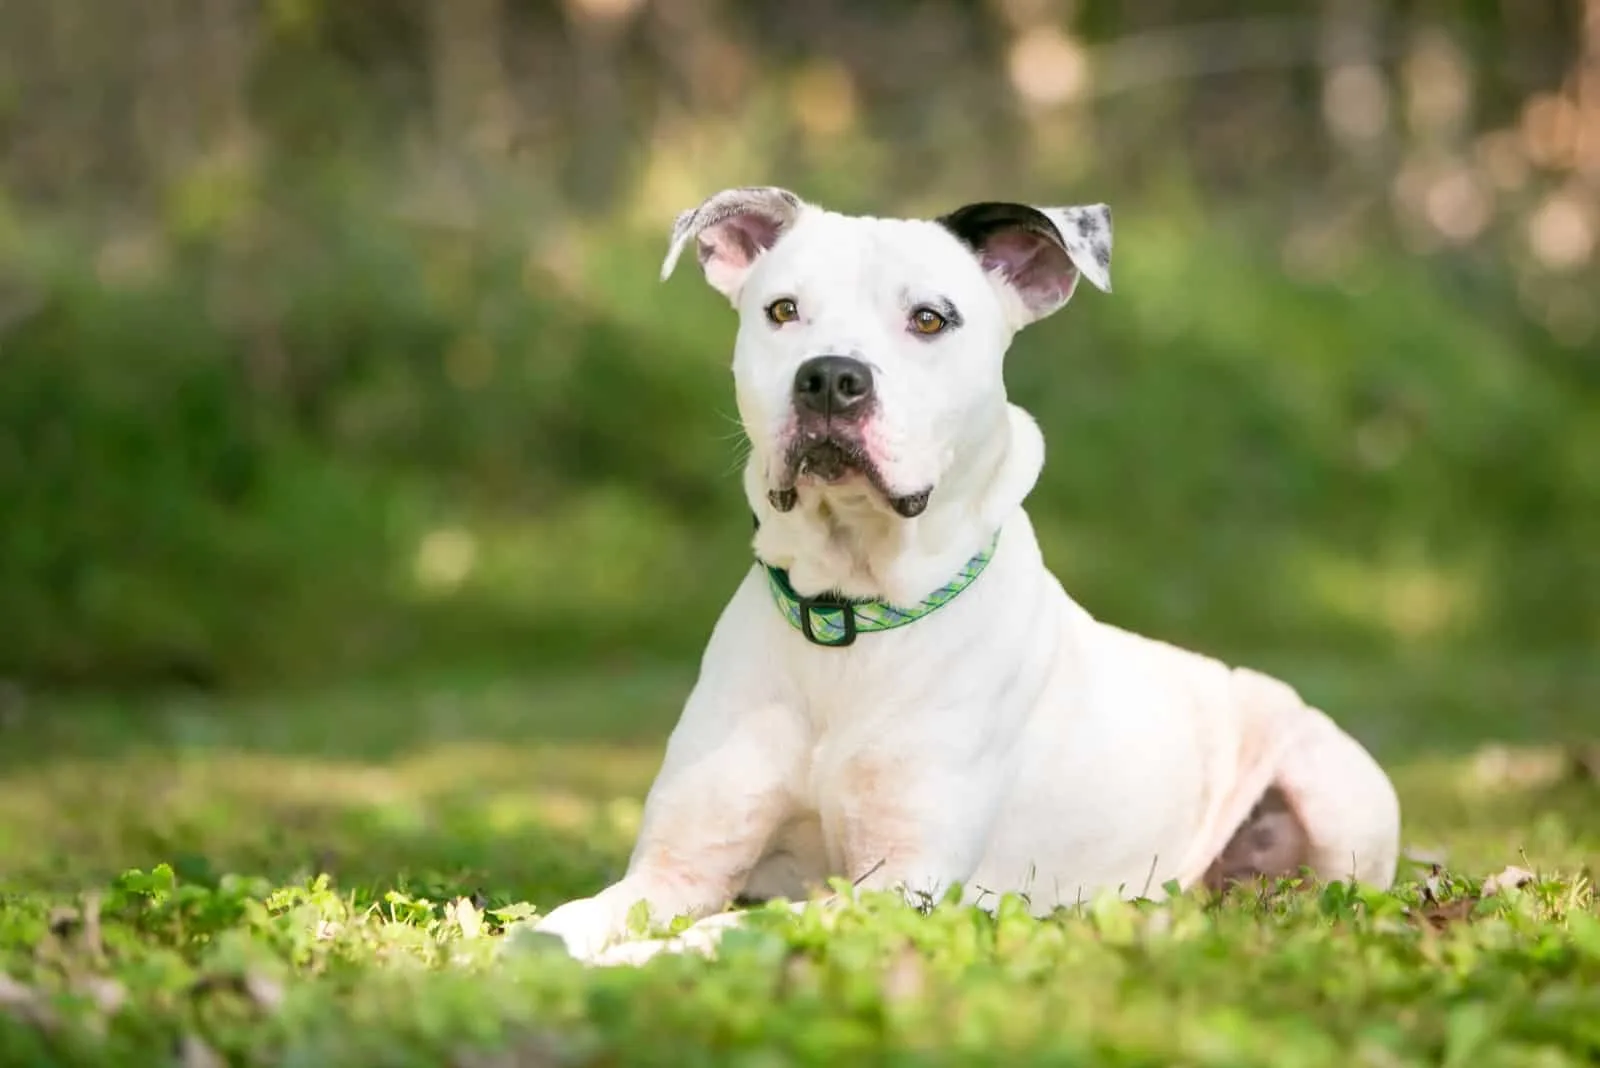 American Bully sitting on grass looking away